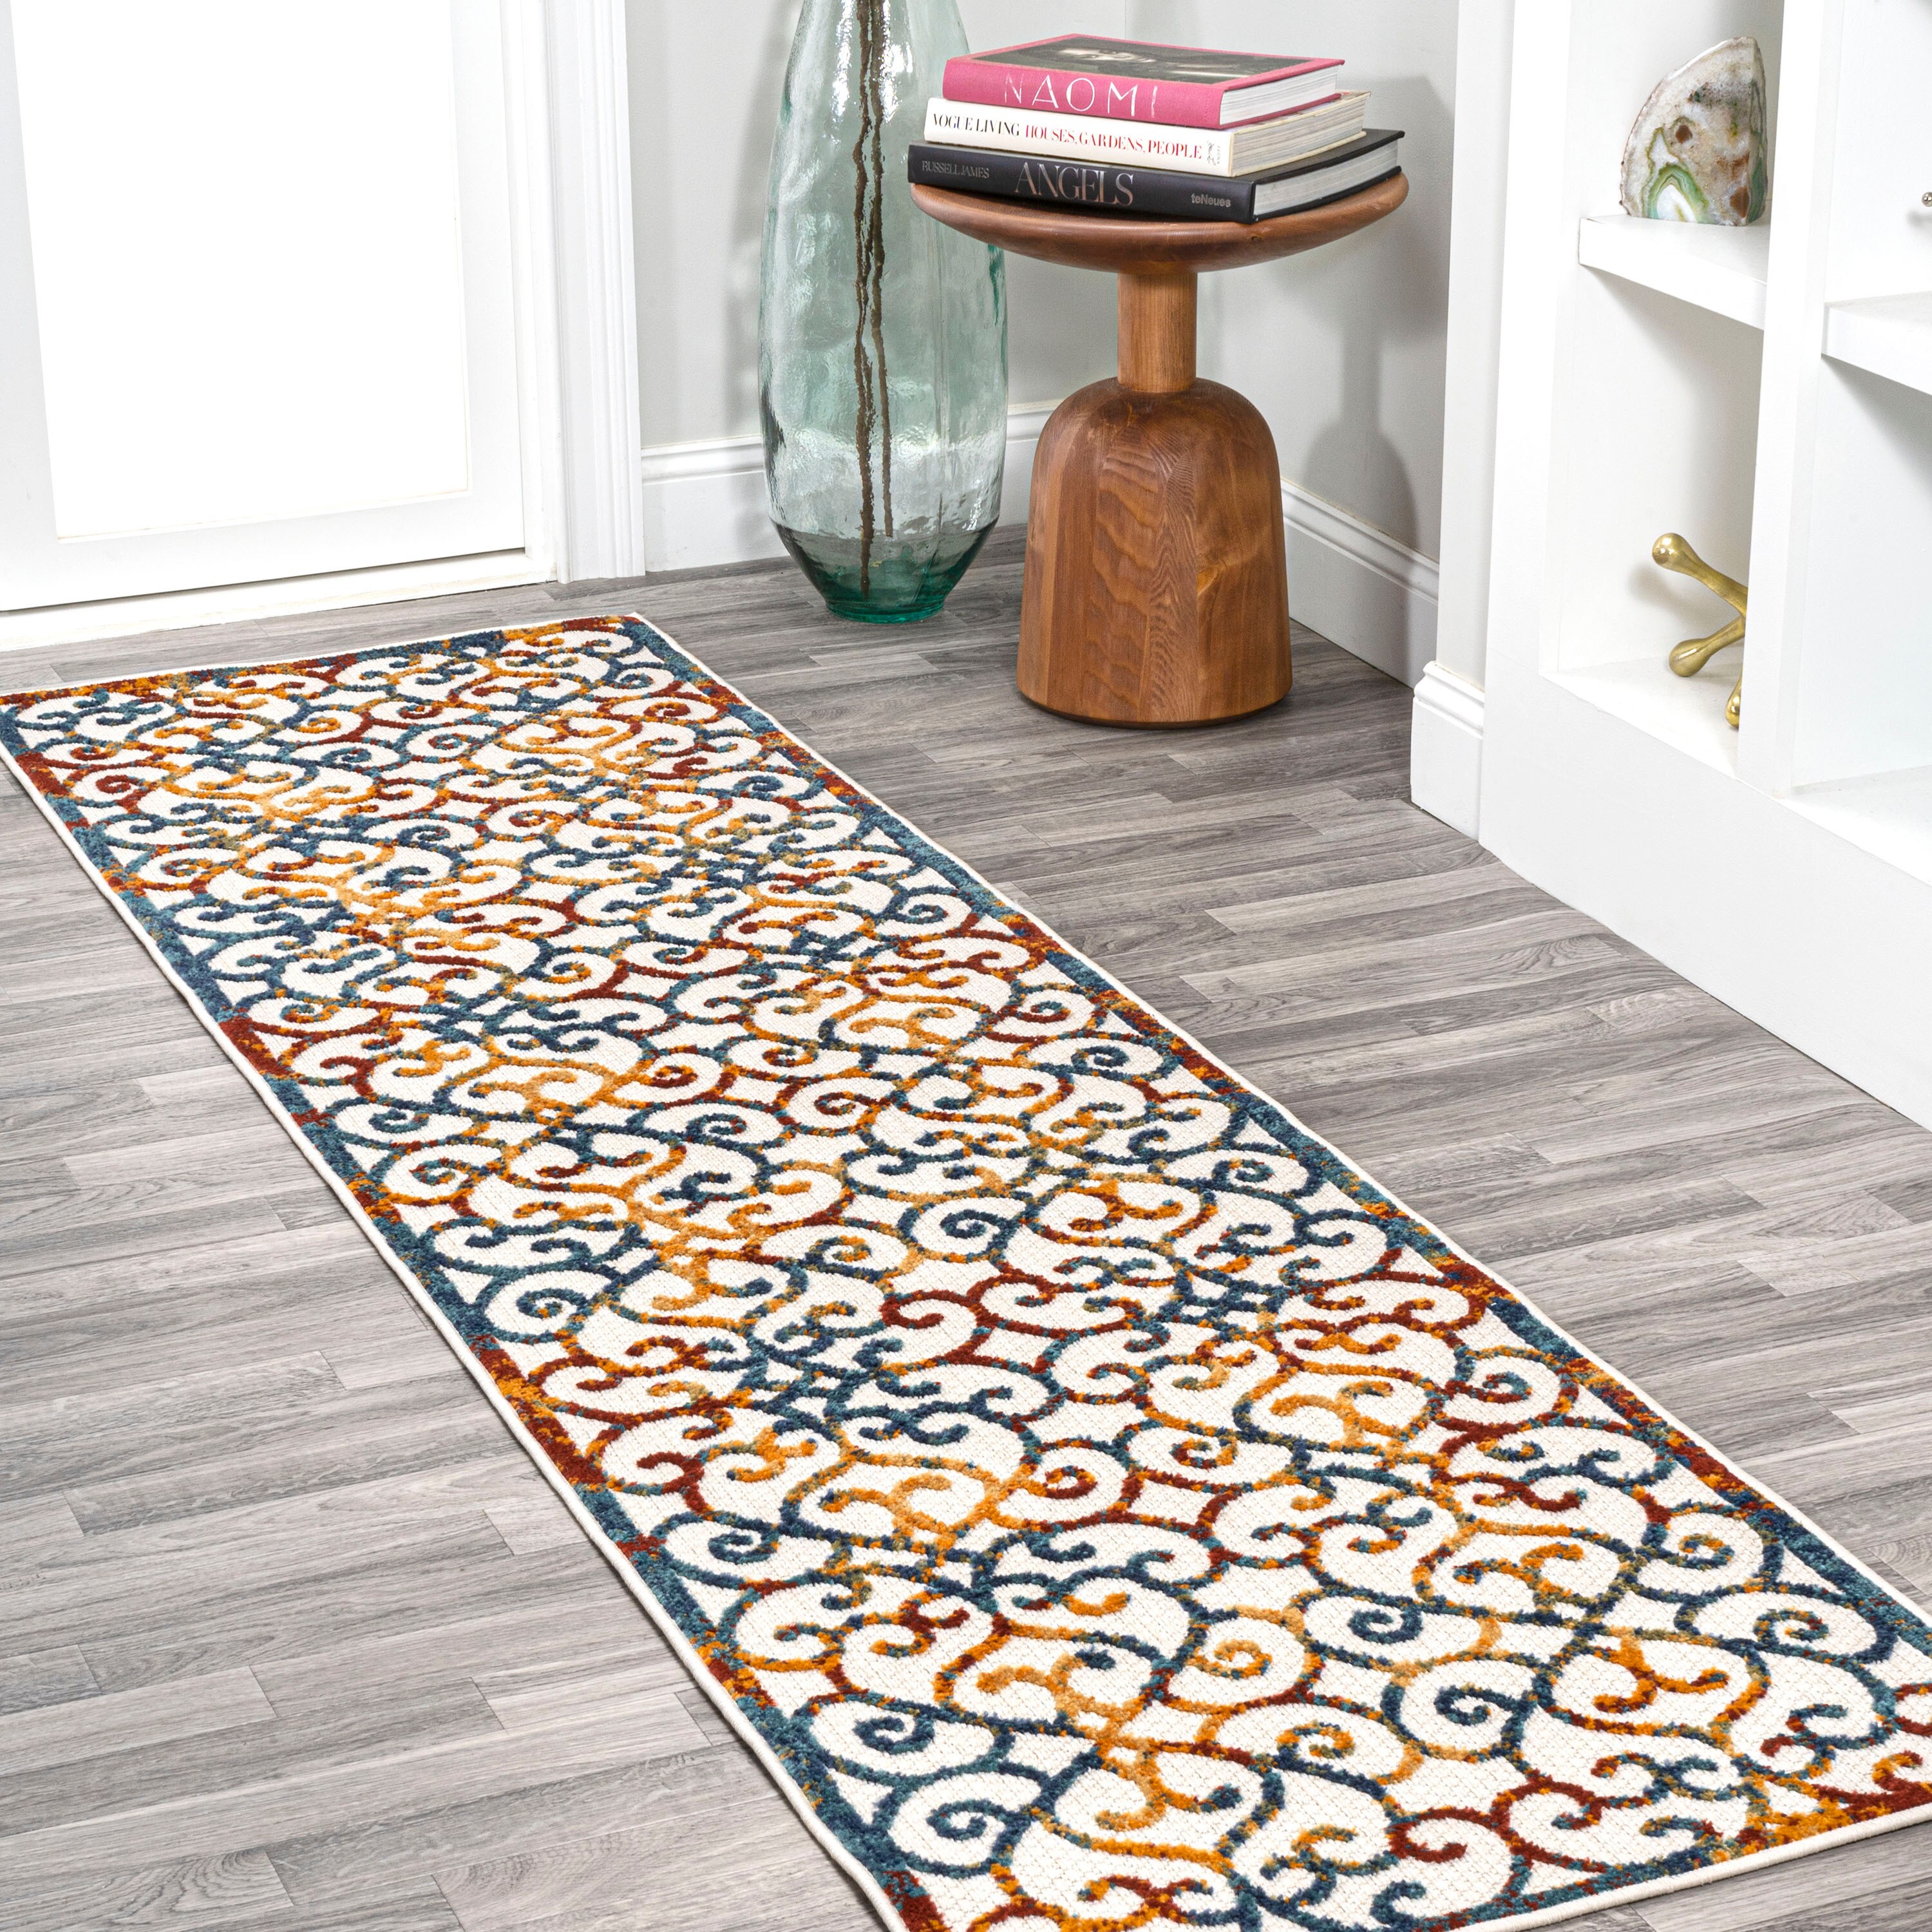 Trellis Rug 100% Cotton Brown Cream Pattern Washable Large Small Runner Area Mat 